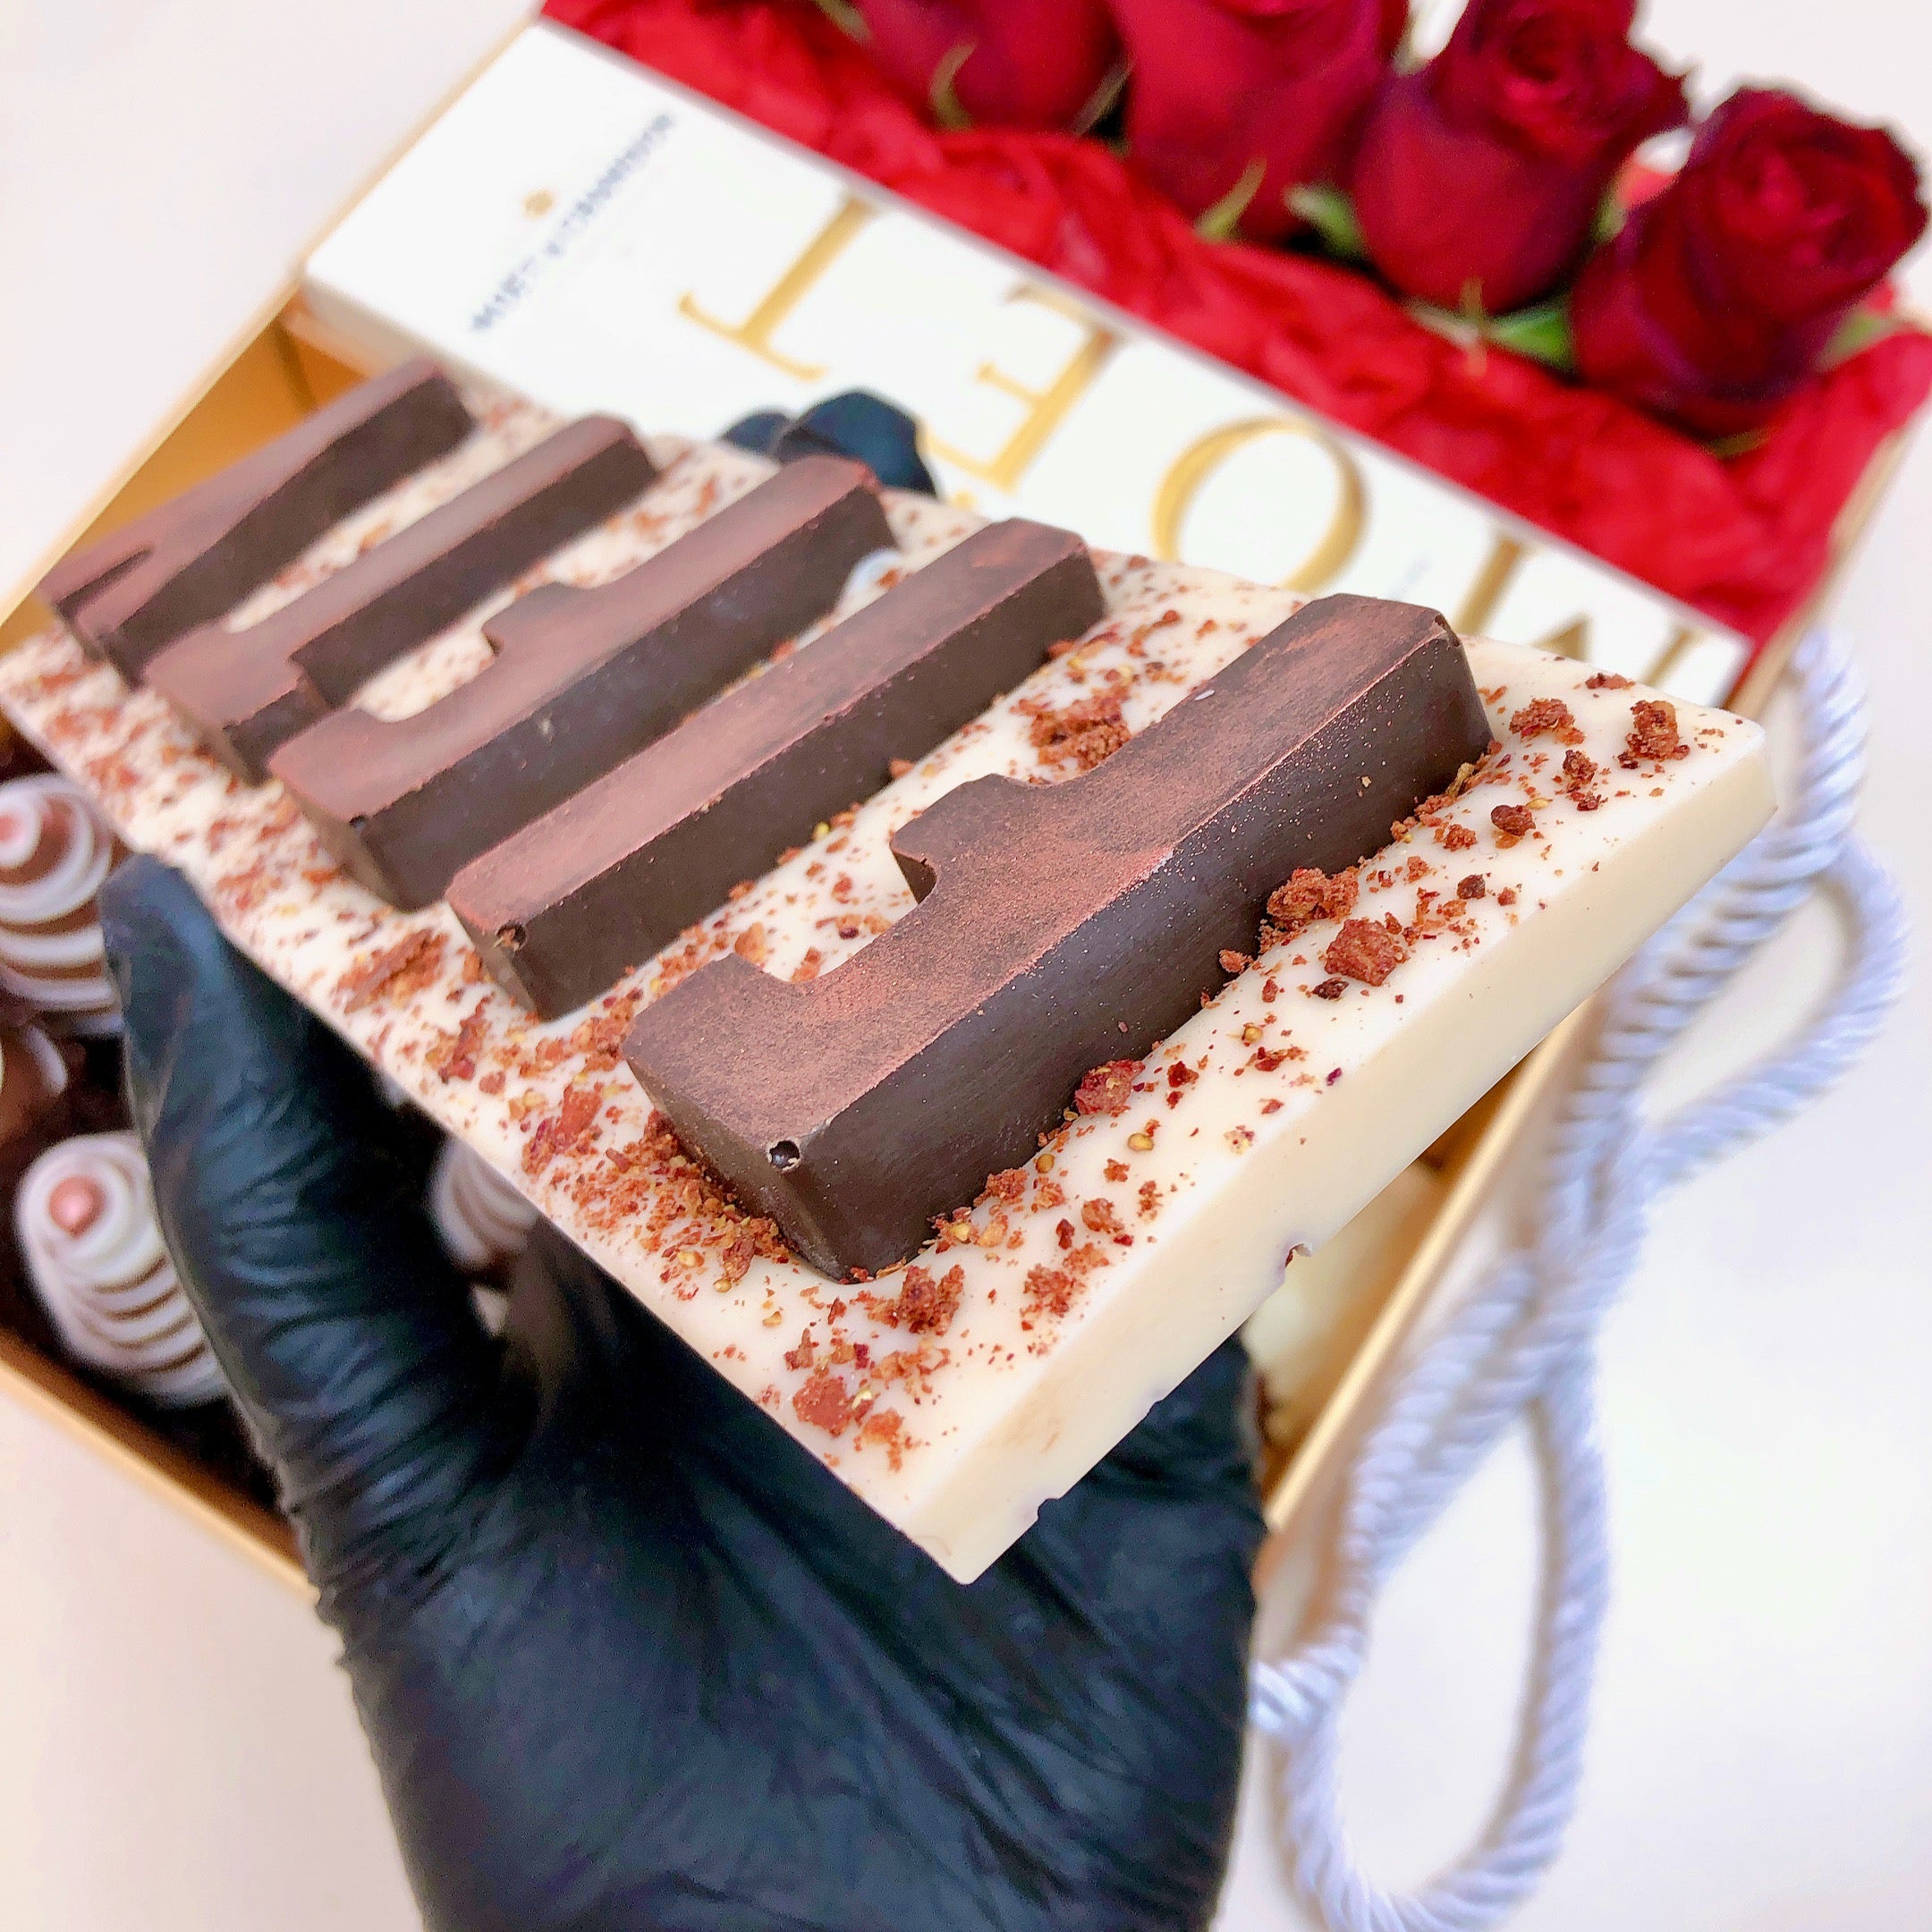 Chocolate 50th anniversary gift with champagne chocolate covered strawberries and flowers hamper for her